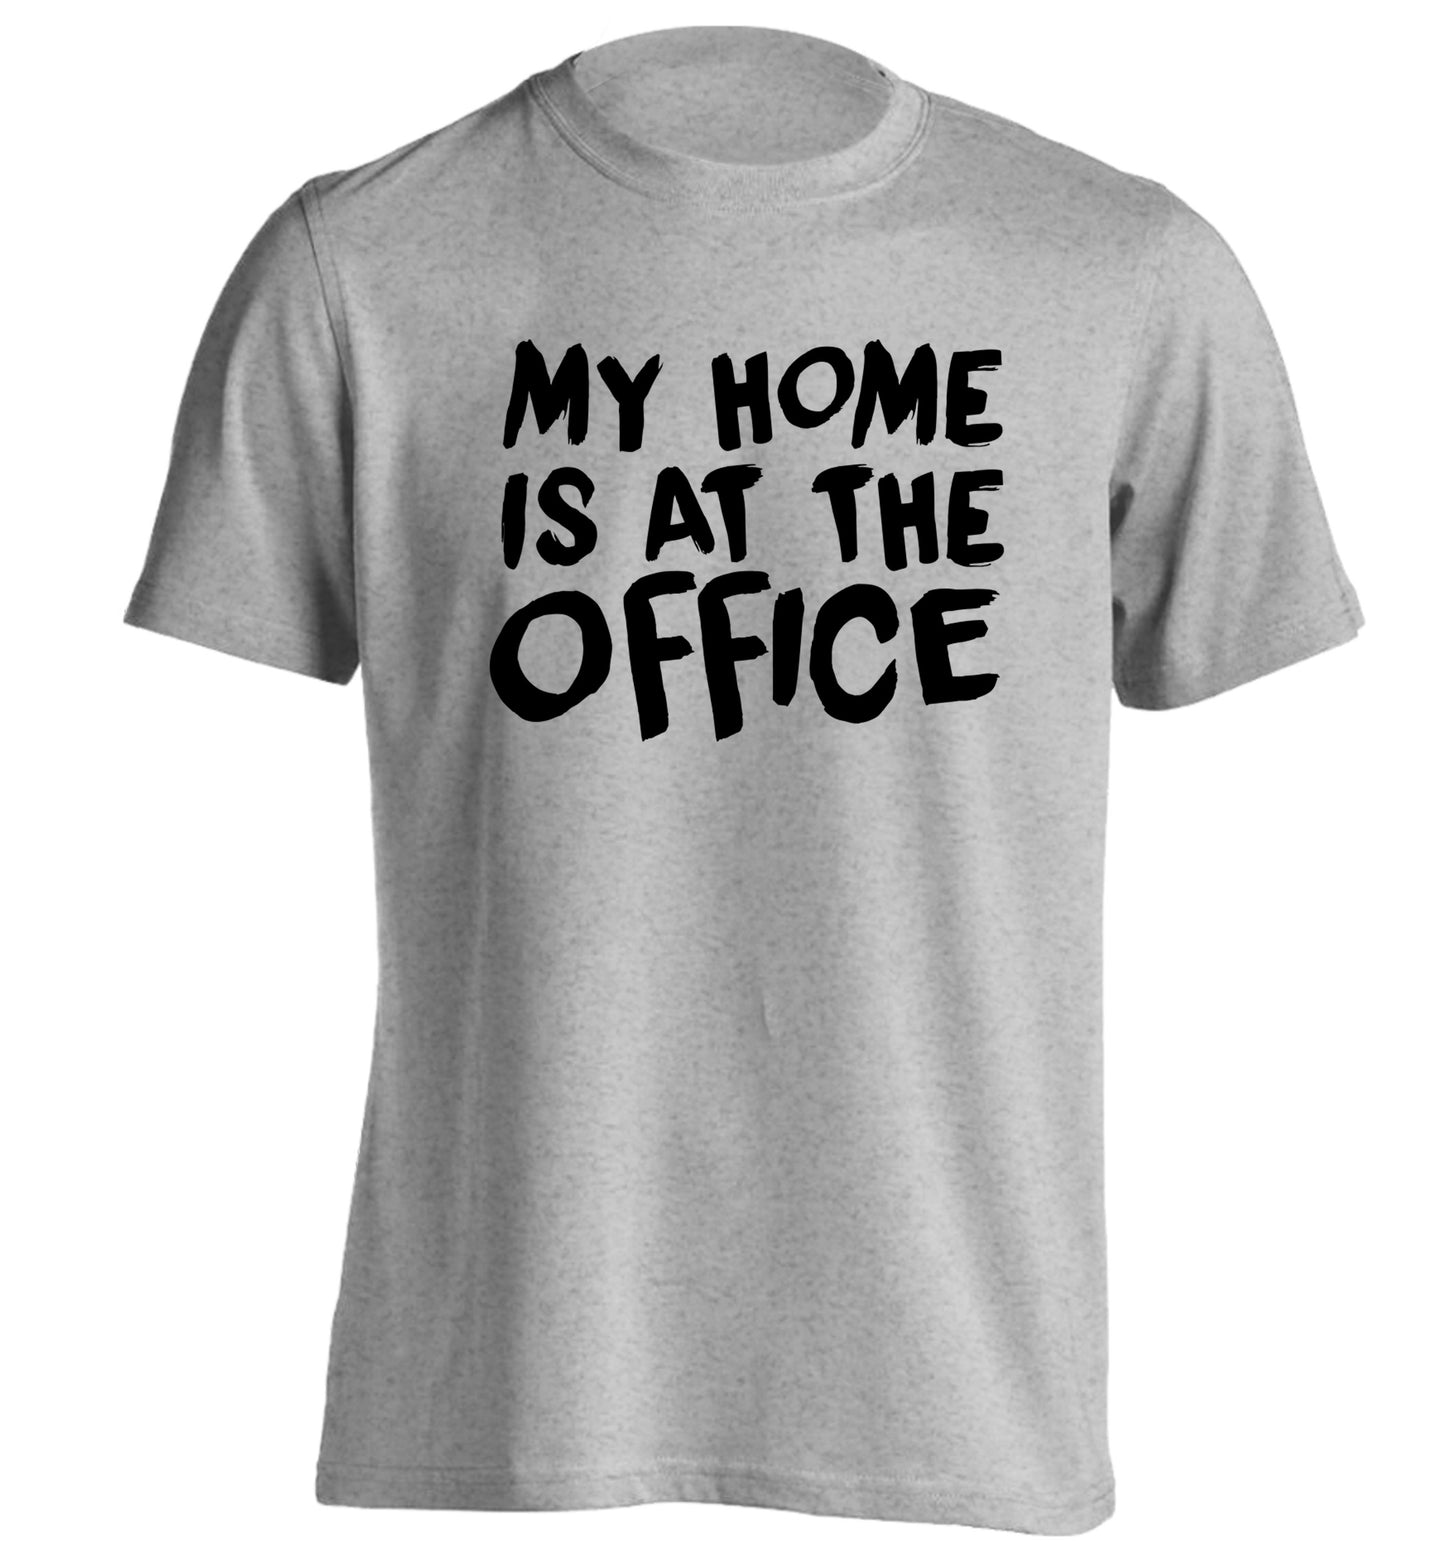 My home is at the office adults unisex grey Tshirt 2XL